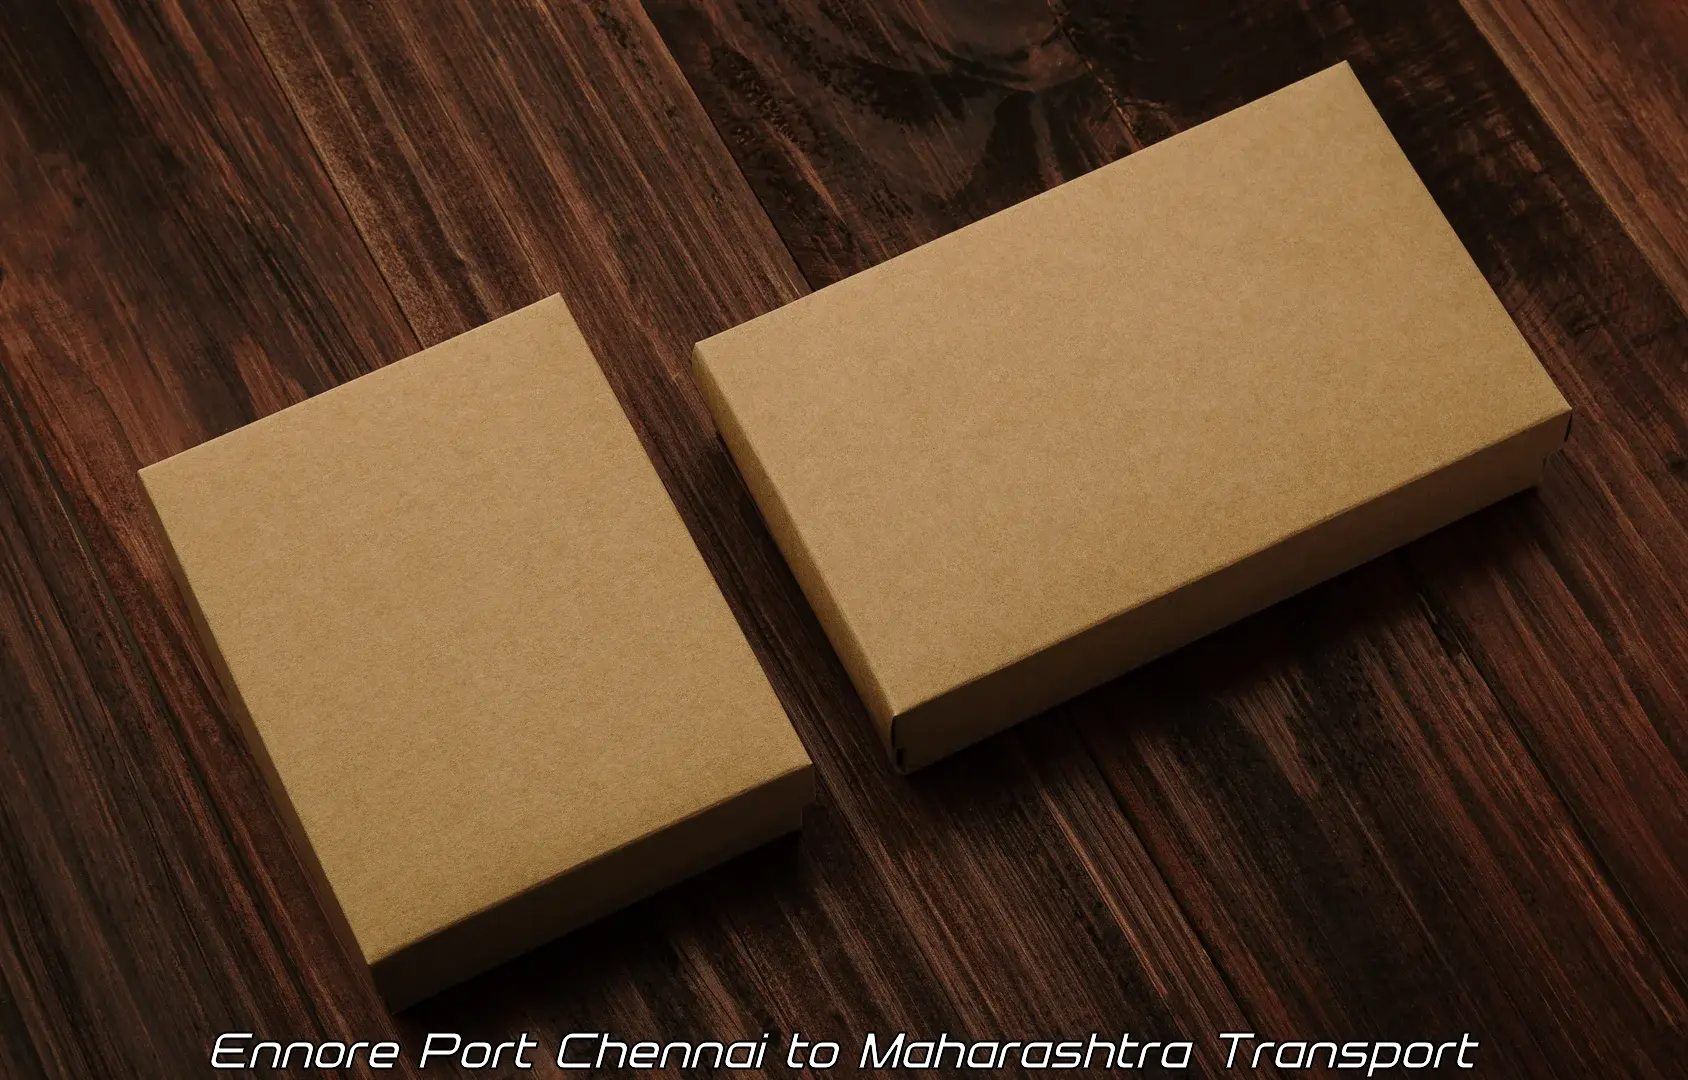 Commercial transport service Ennore Port Chennai to Chandrapur